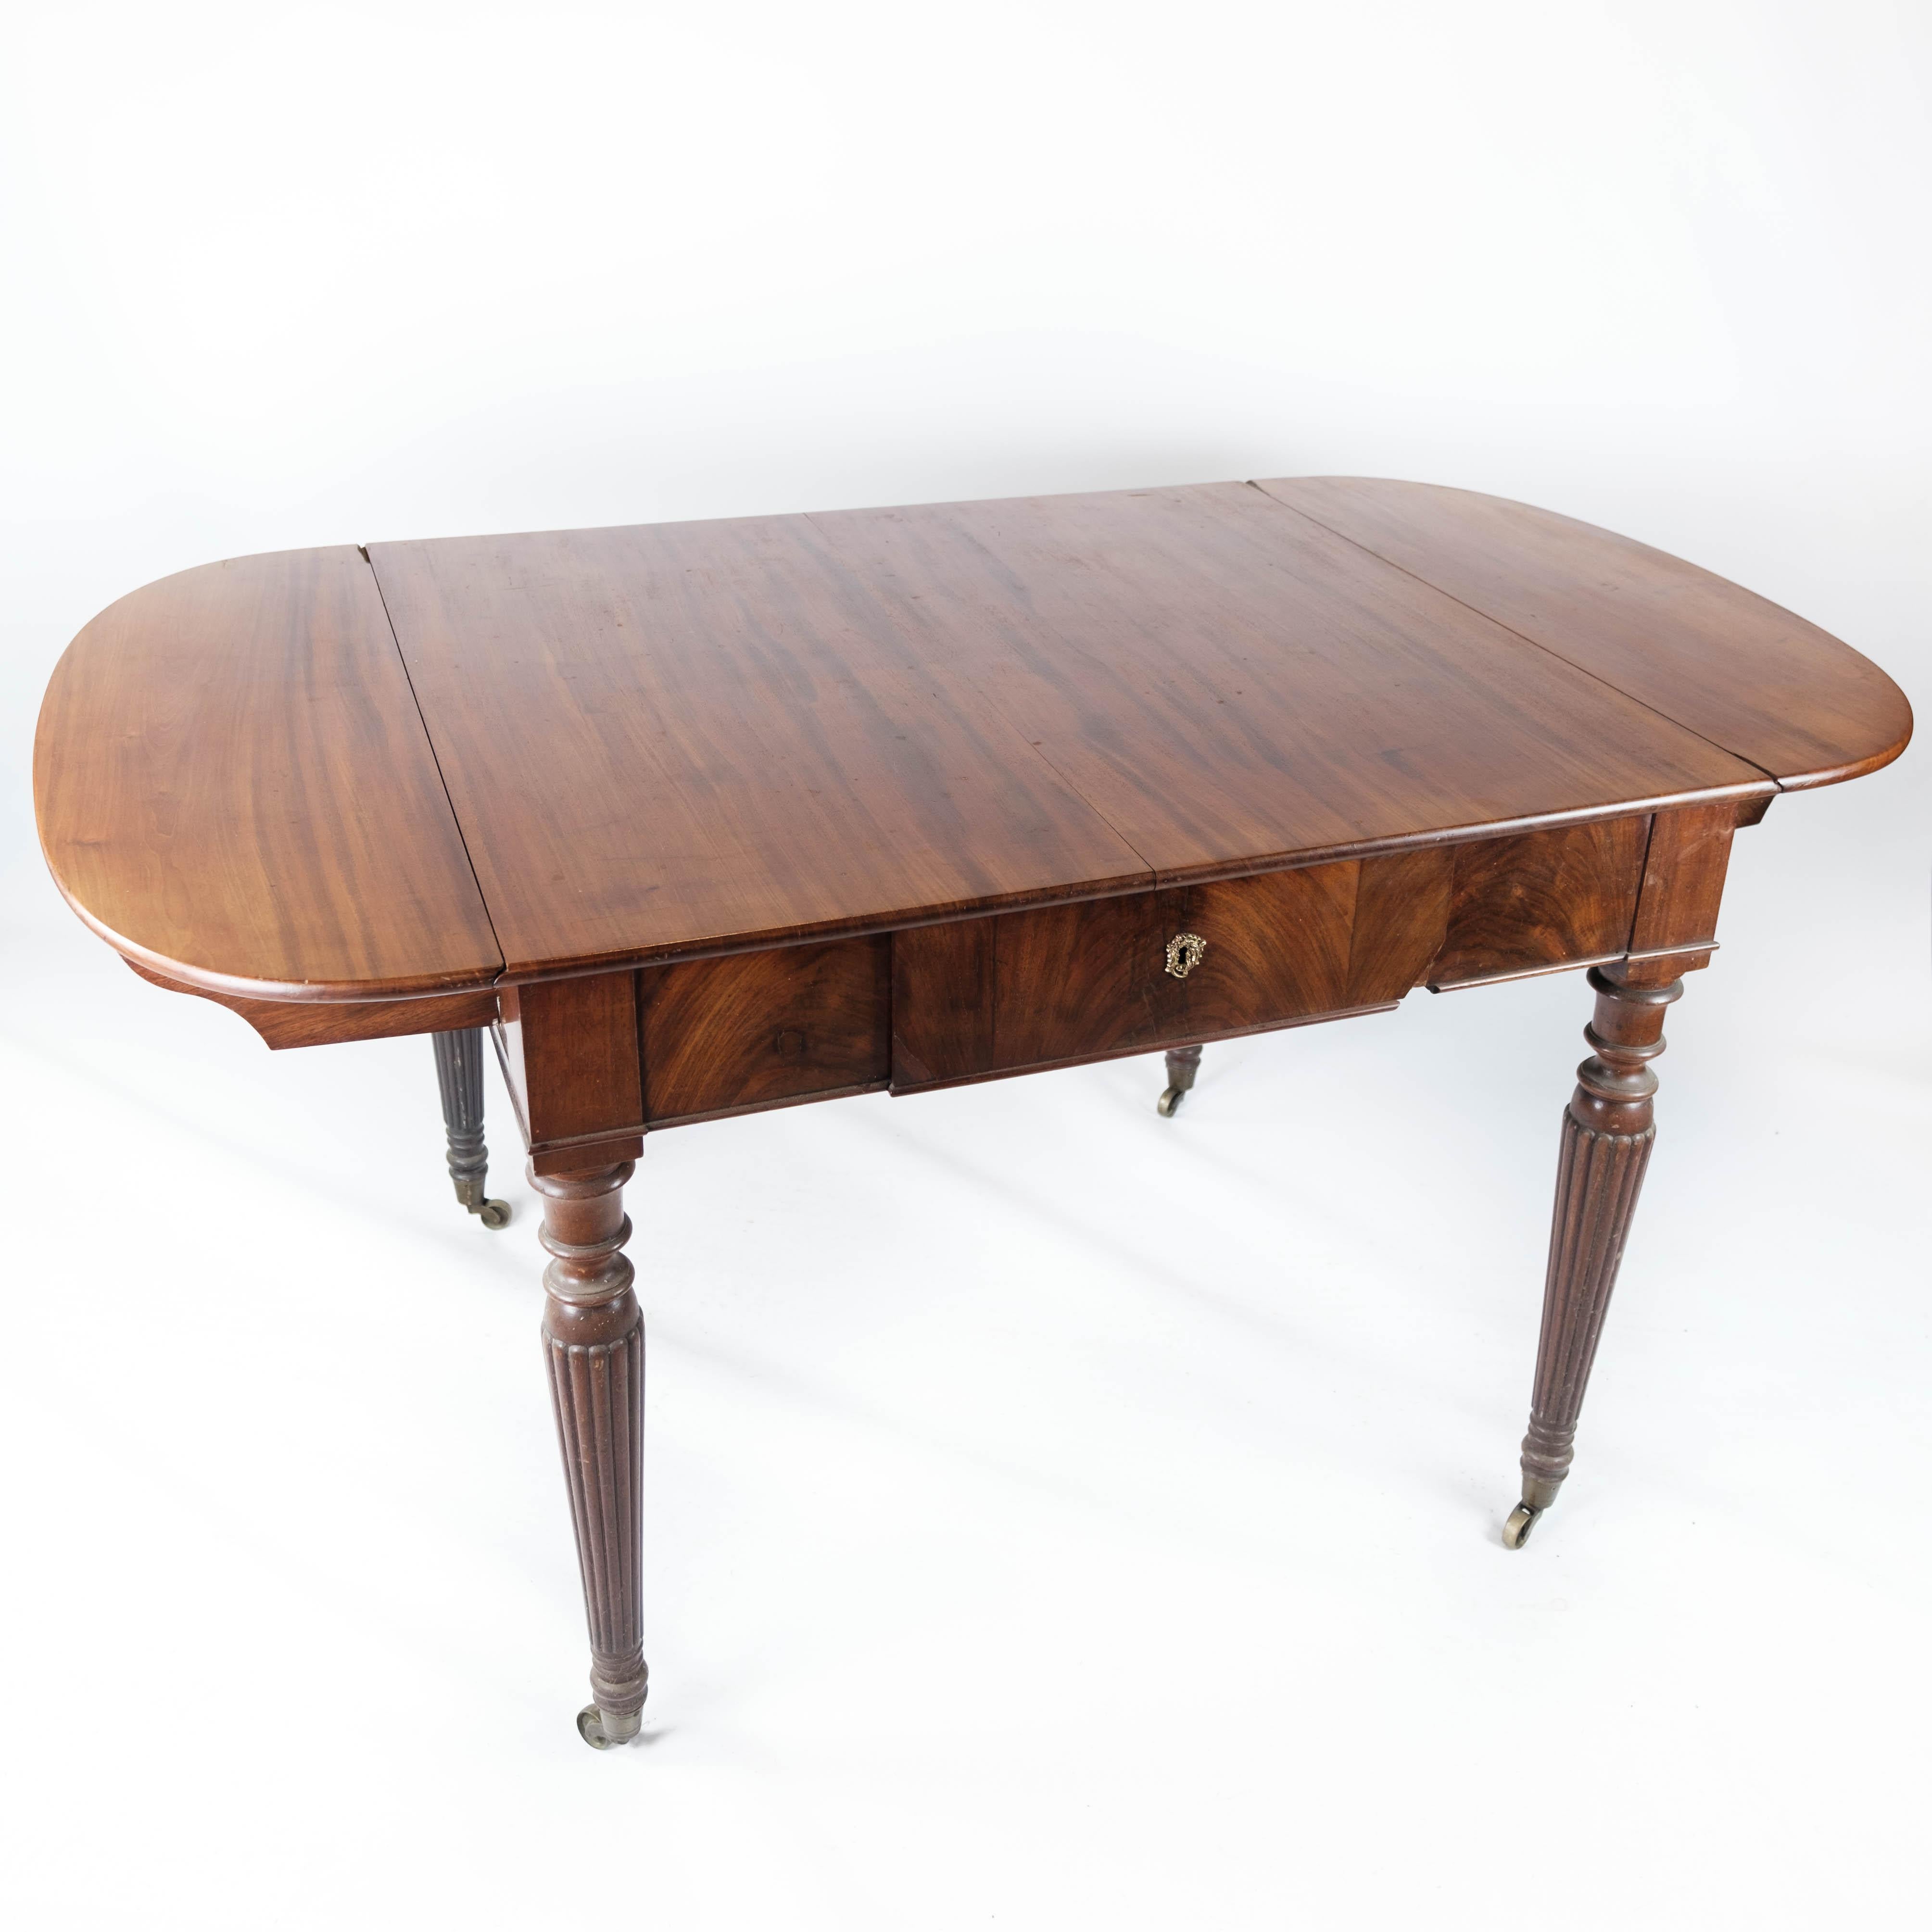 Dining Table of Mahogany with Extension Plates, 1840s For Sale 6